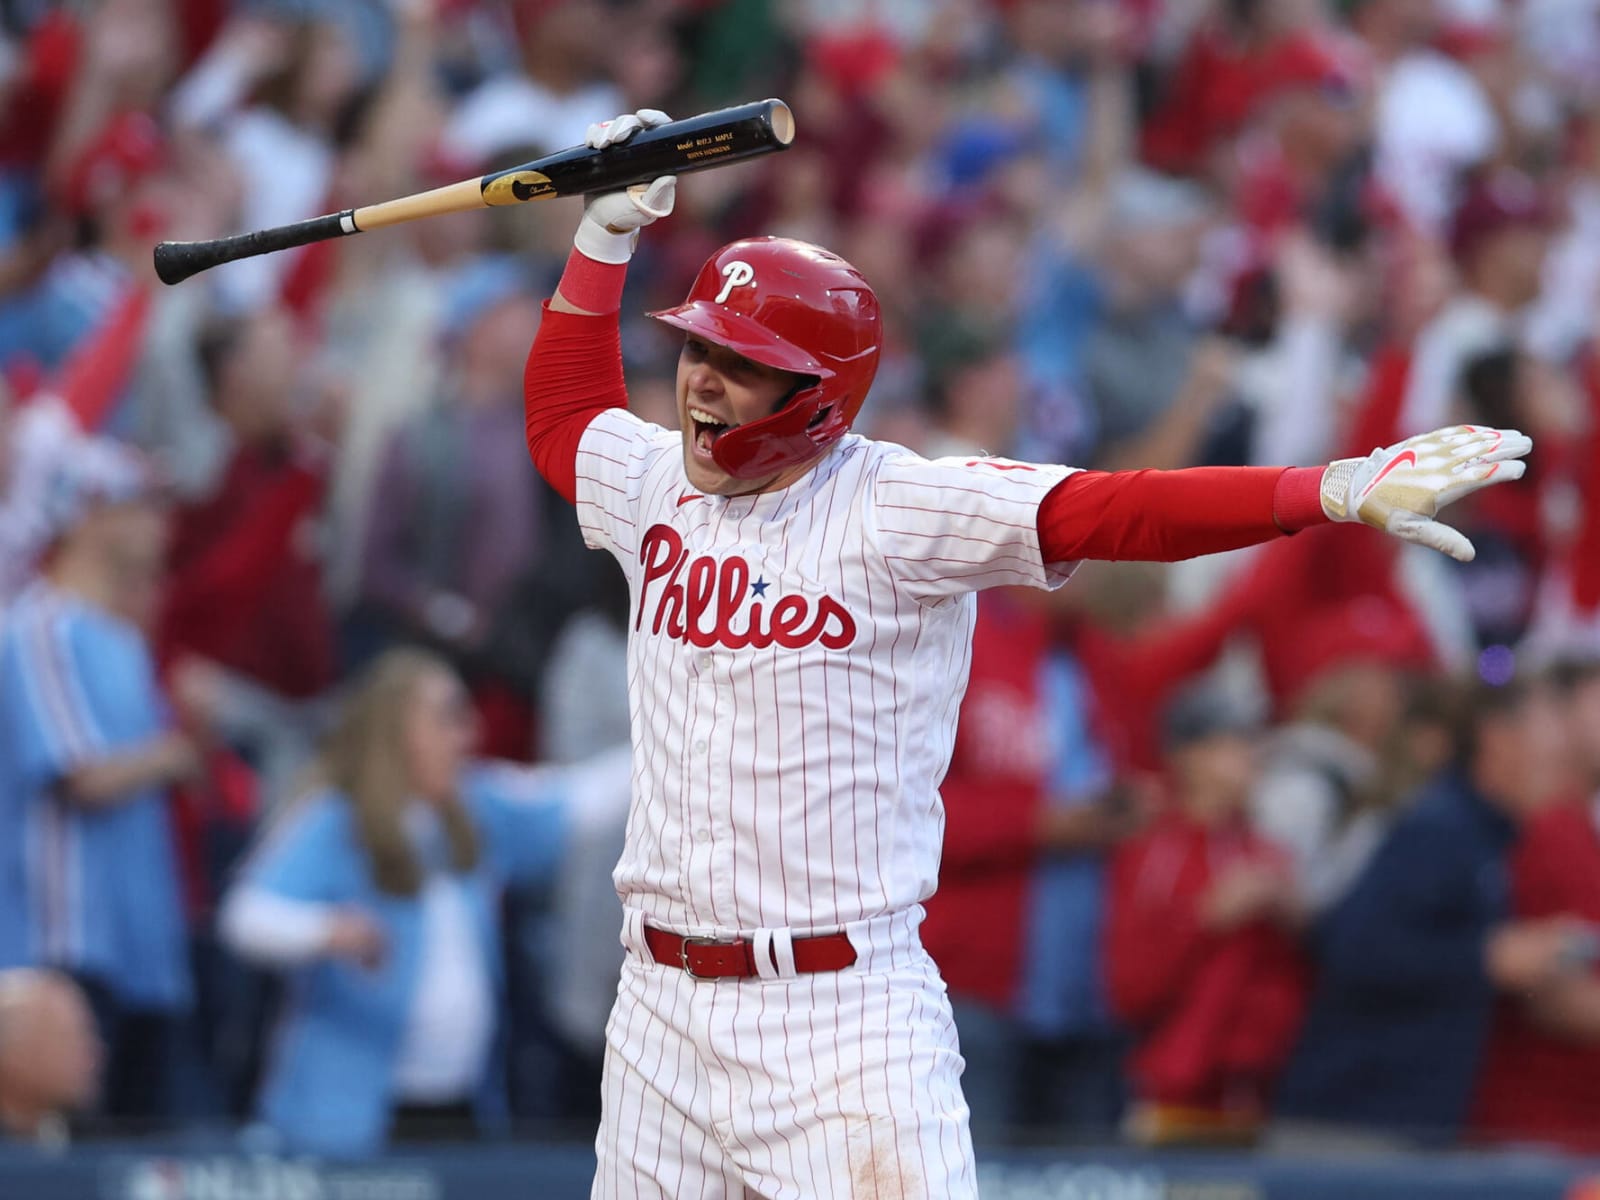 Would you support a lifetime suspension had Rhys Hoskins spiked